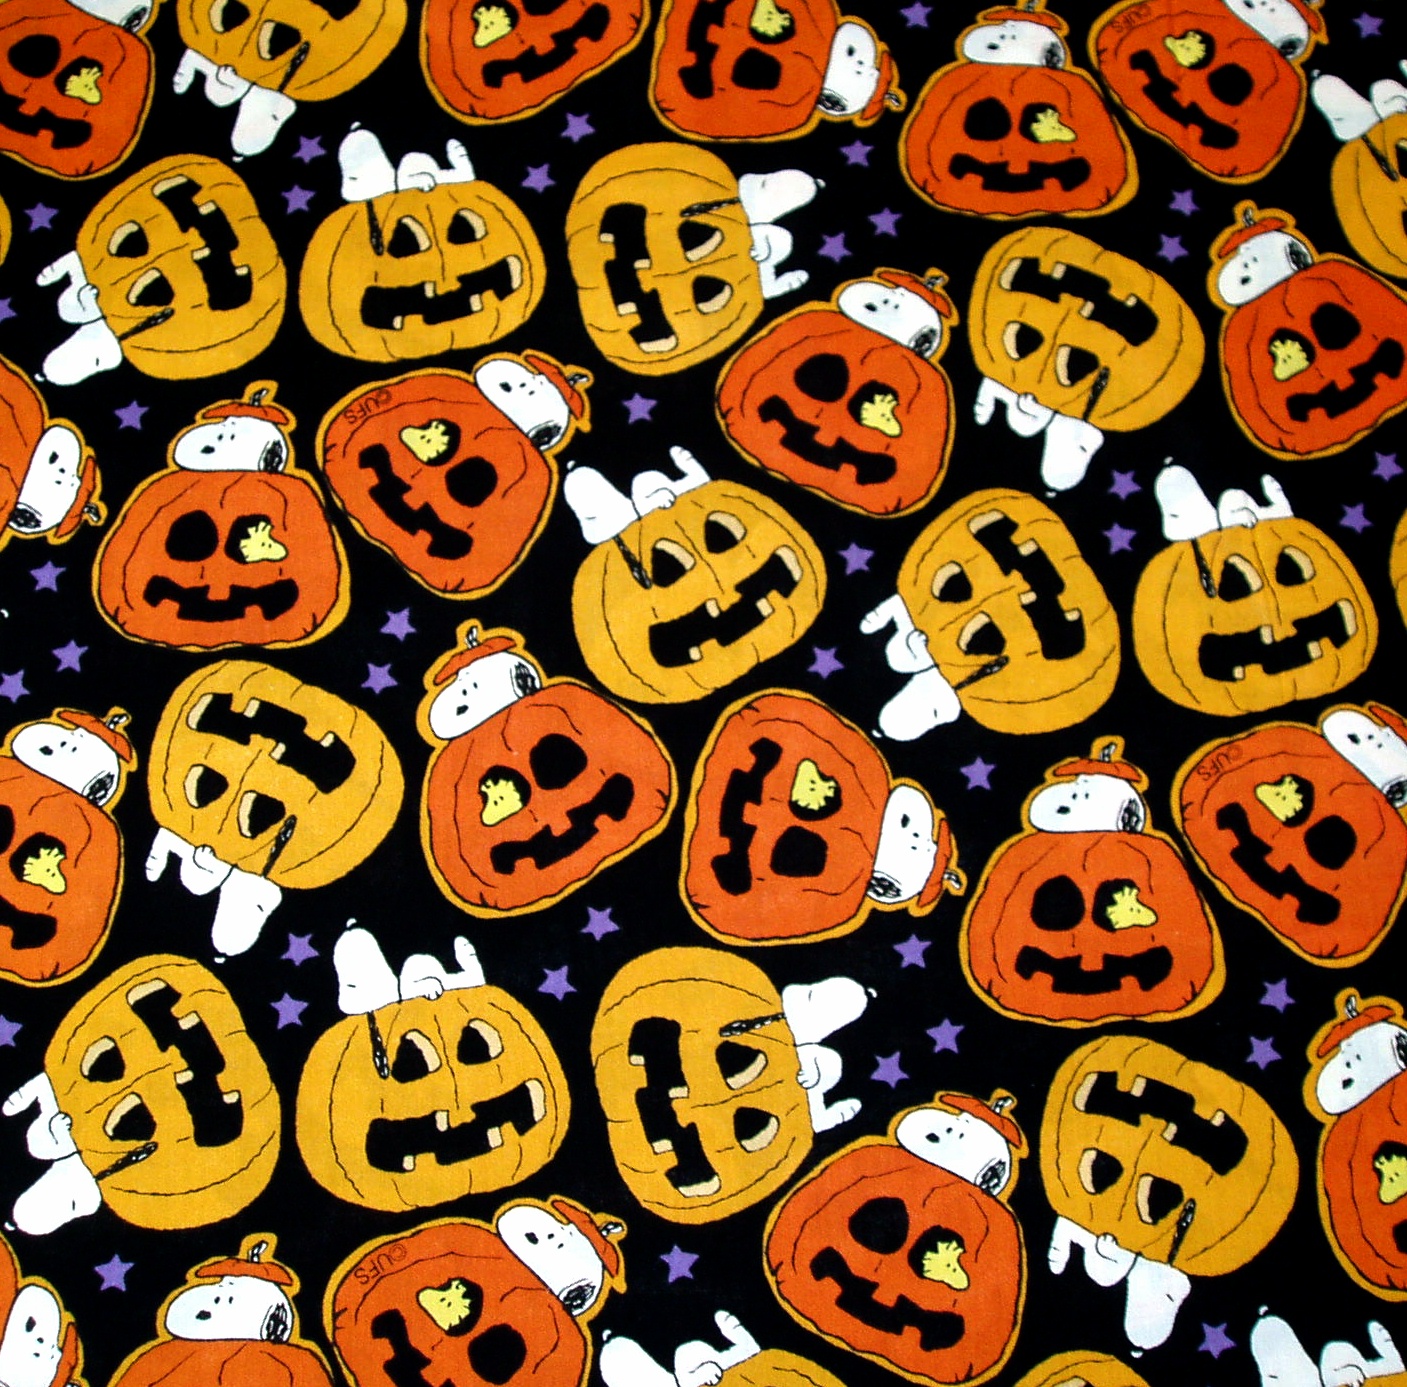 Free download halloween snoopy wallpaper x for your desktop mobile tablet explore snoopy halloween wallpaper snoopy wallpaper free snoopy wallpaper snoopy background